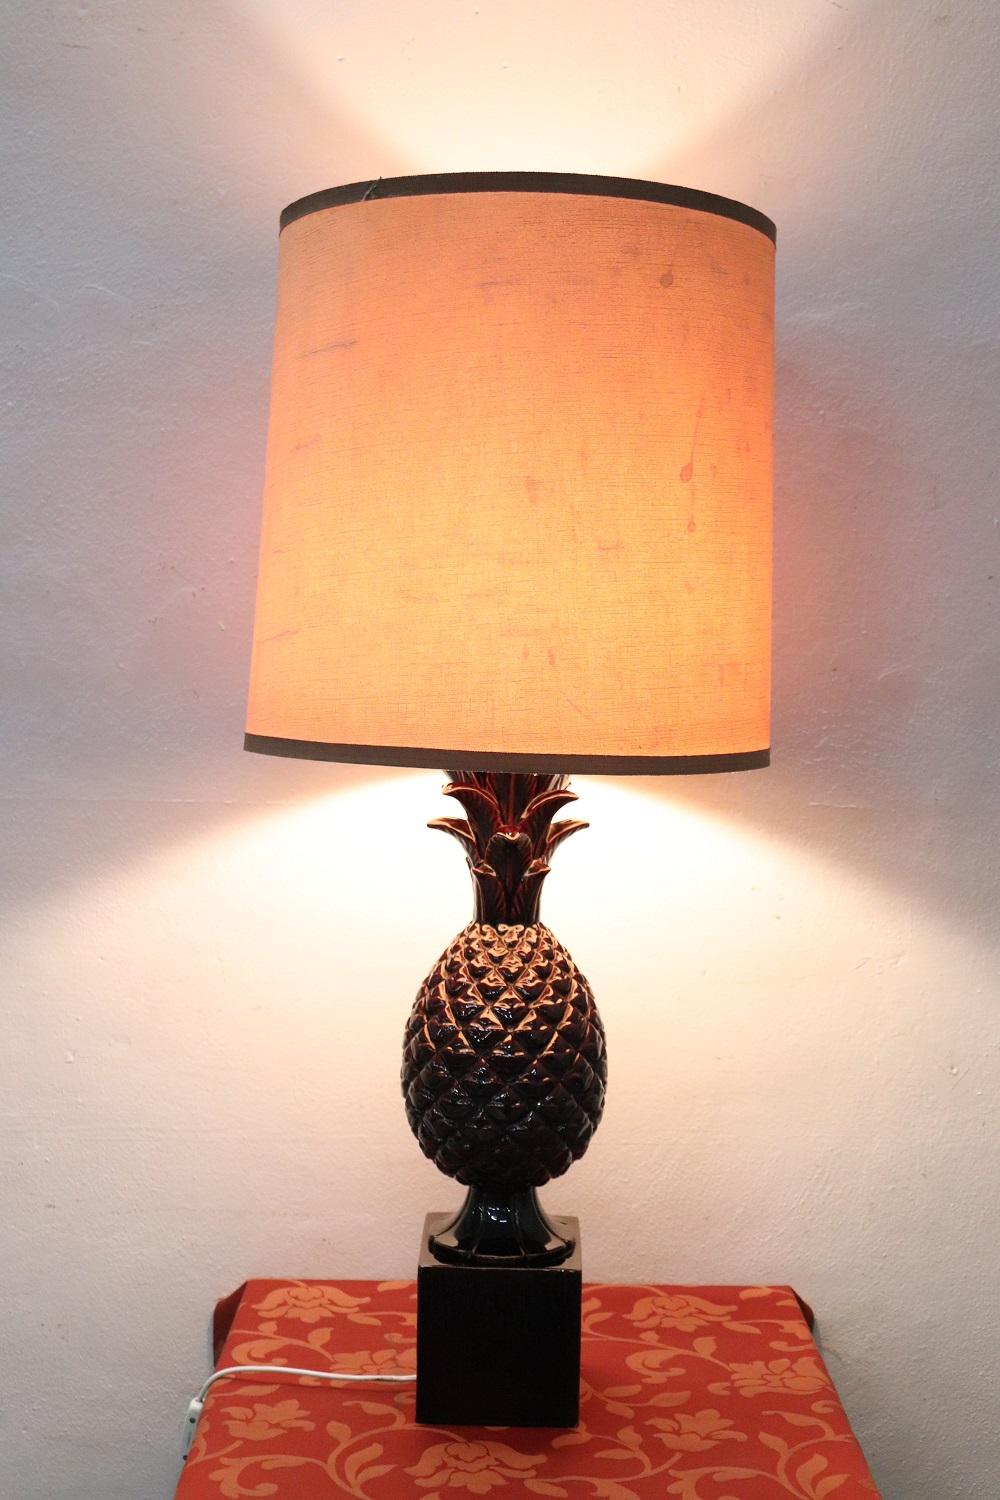 Beautiful pineapple table lamp, 1970s in brown color. This lamp is a true work of art.